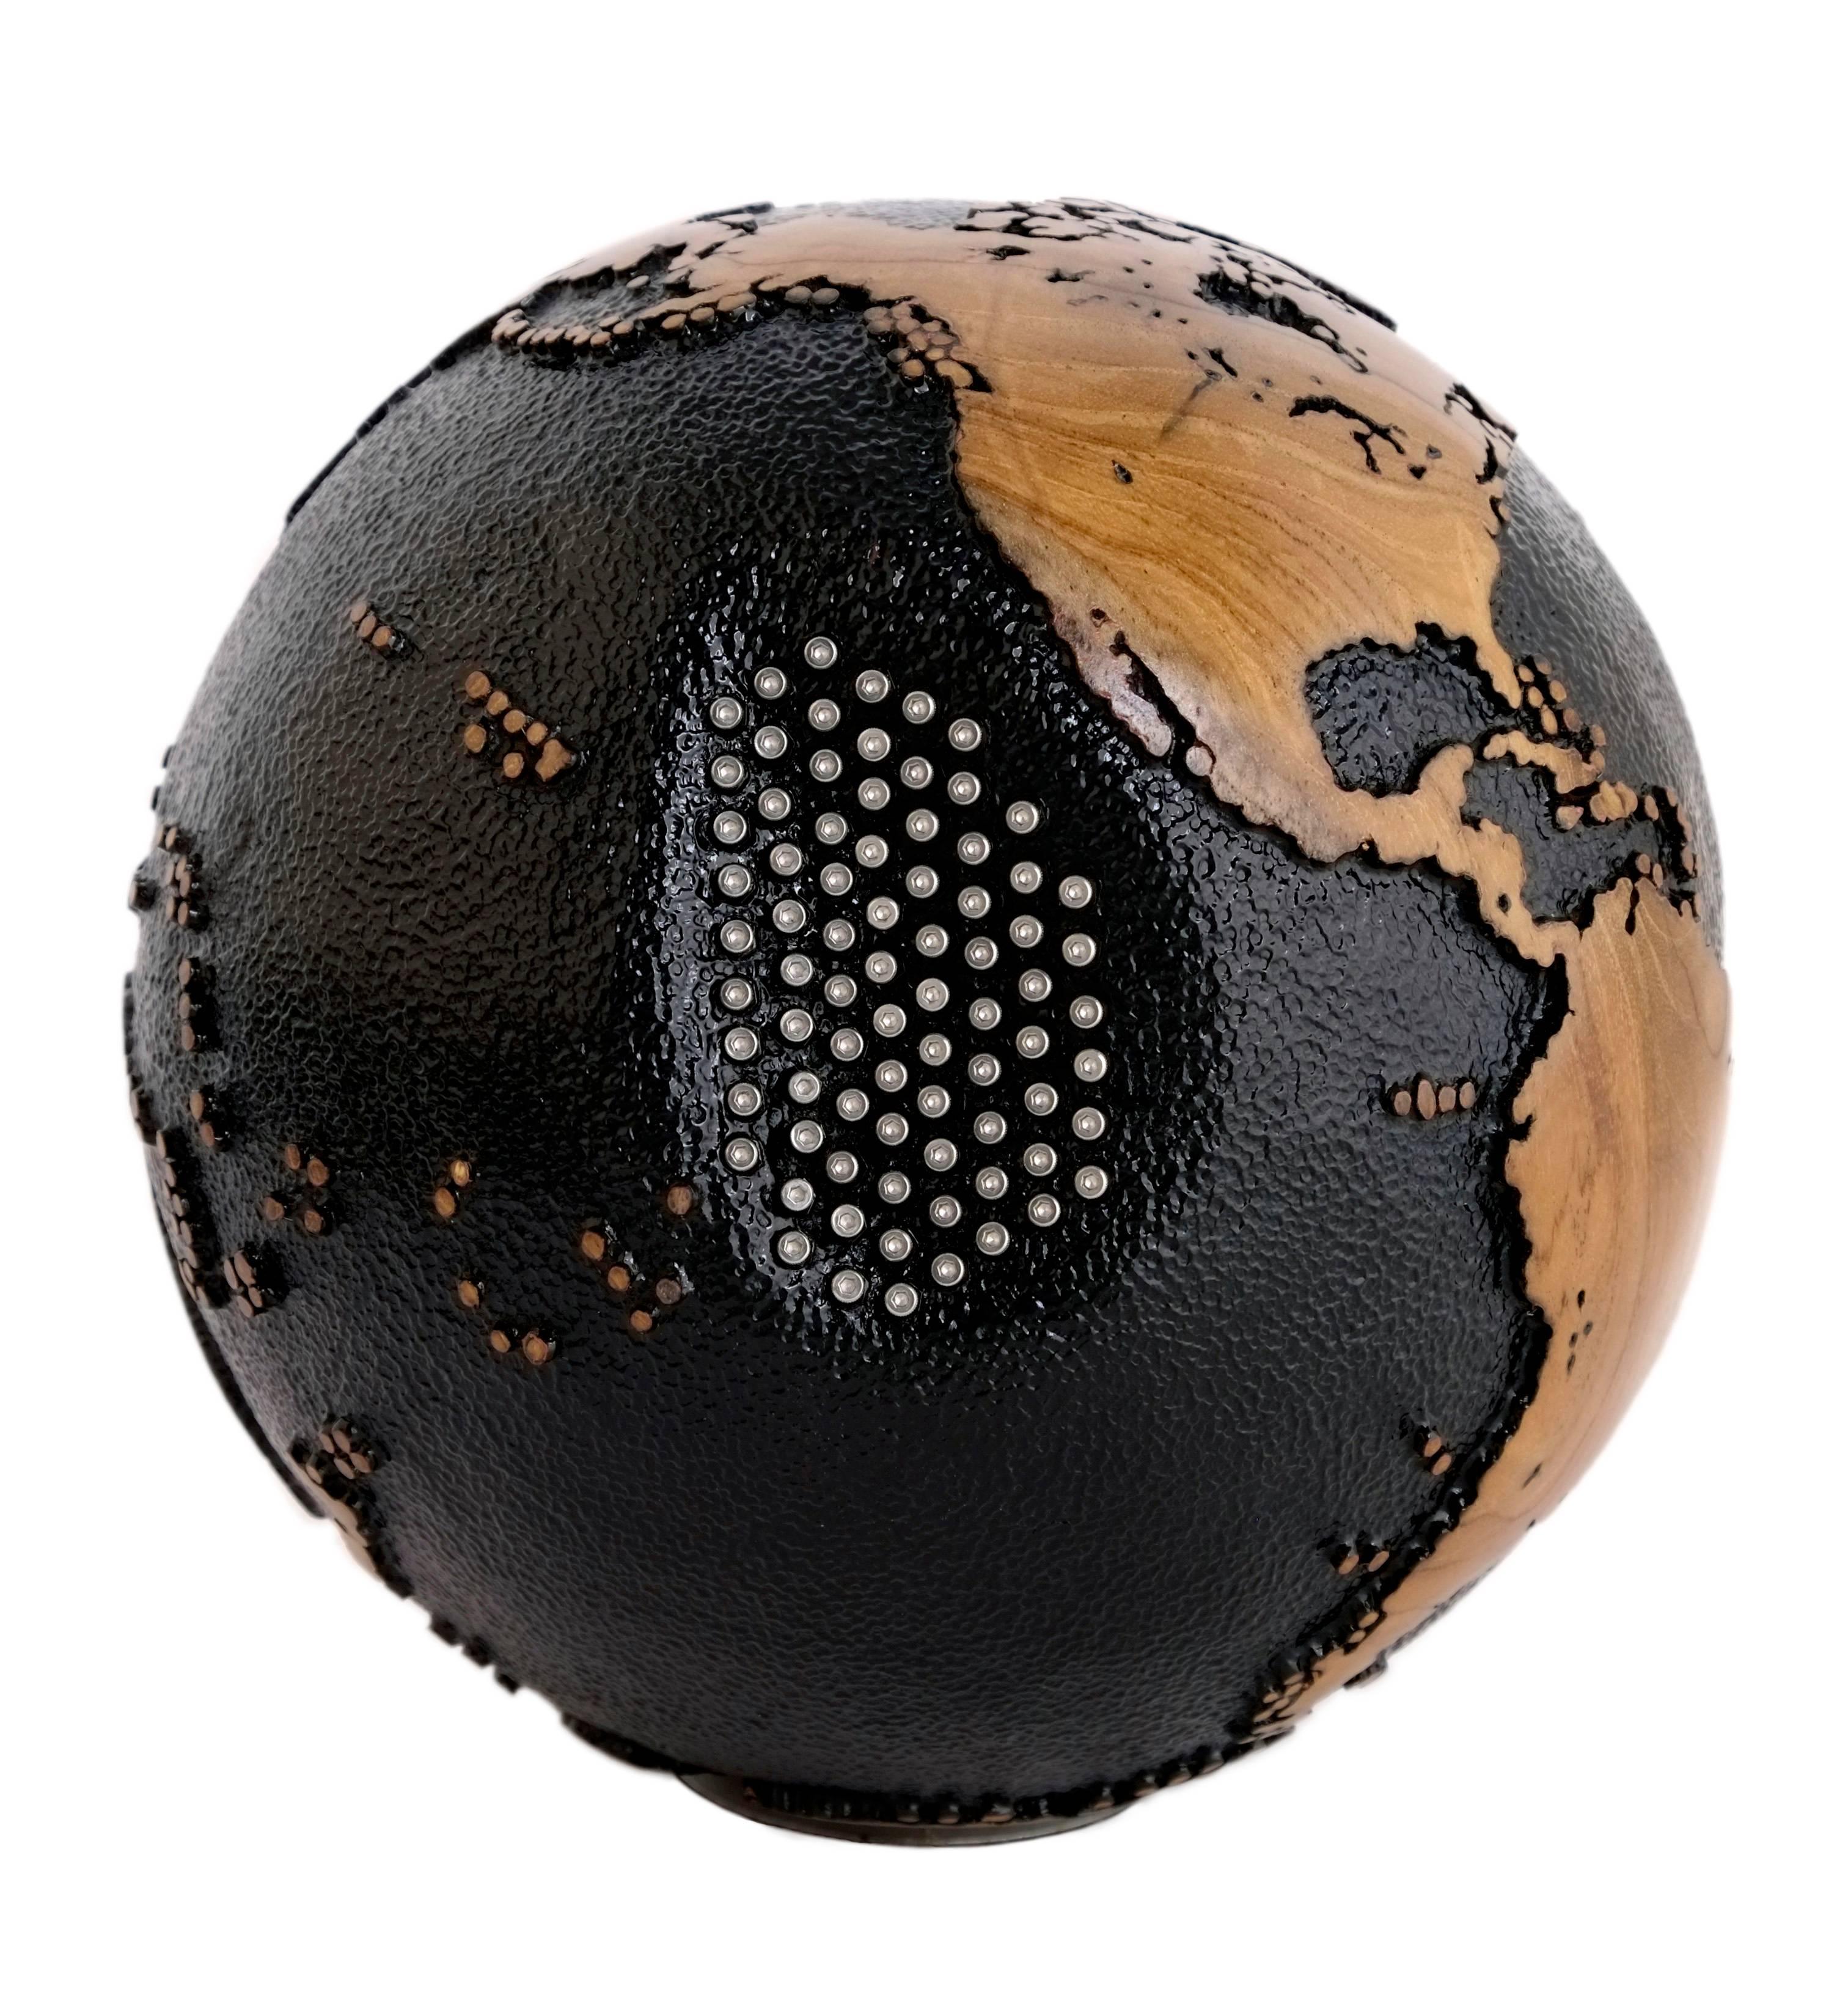 Appliqué Superb Black Beauty Wooden Globe with 79 Stainless Bolts, 20 cm, Saturday Sale For Sale